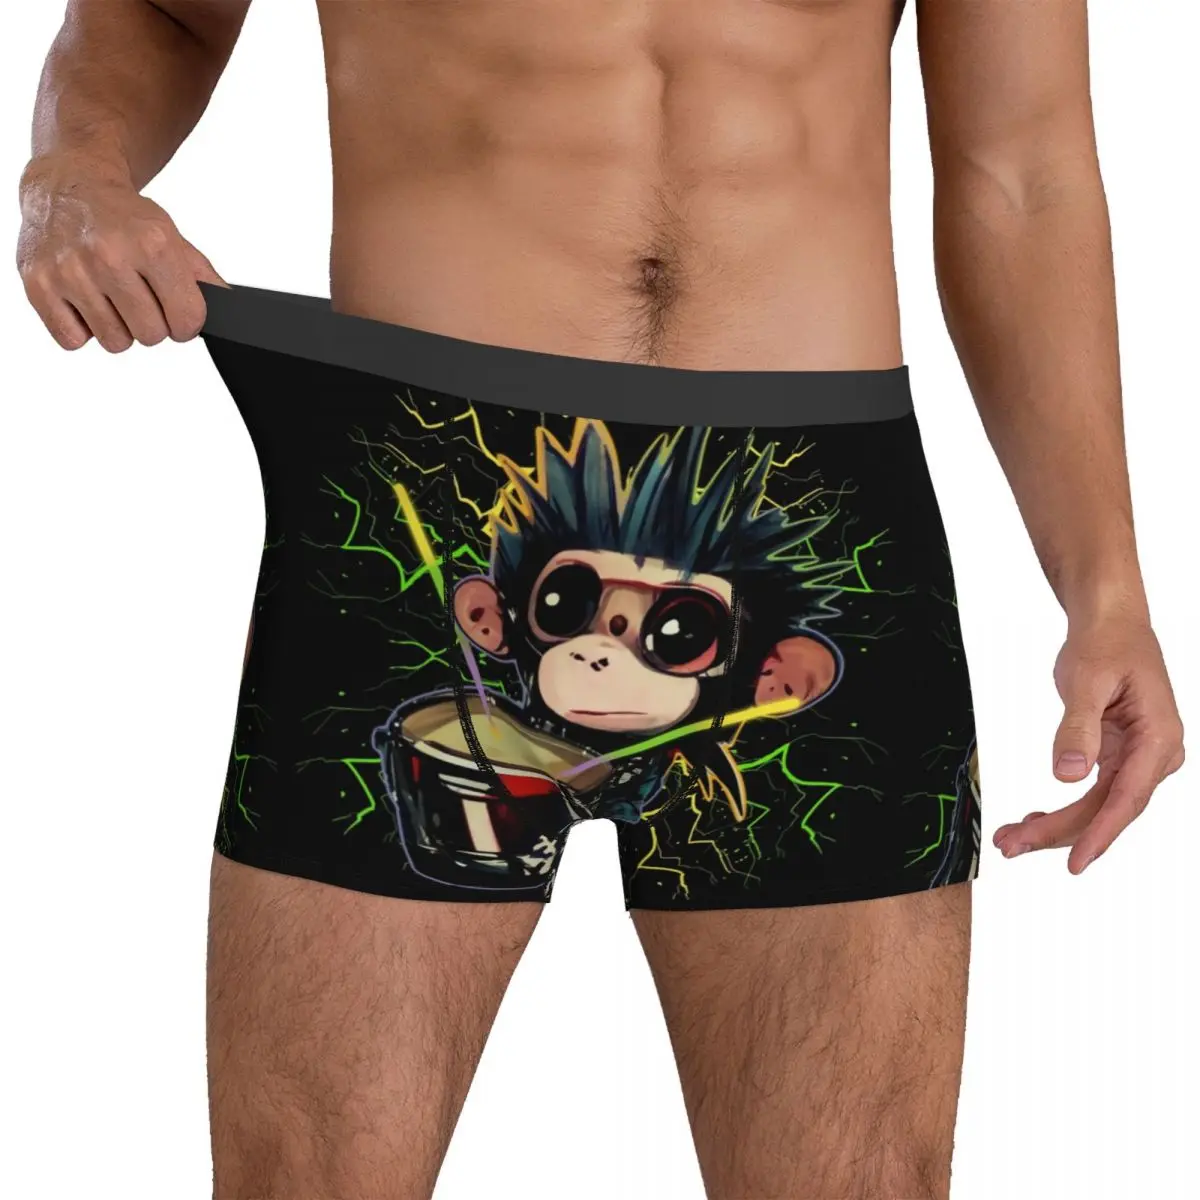 

Drumming Monkey Underwear Cute Animal Print Males Boxer Brief Classic Boxershorts High Quality Printed Oversize Underpants